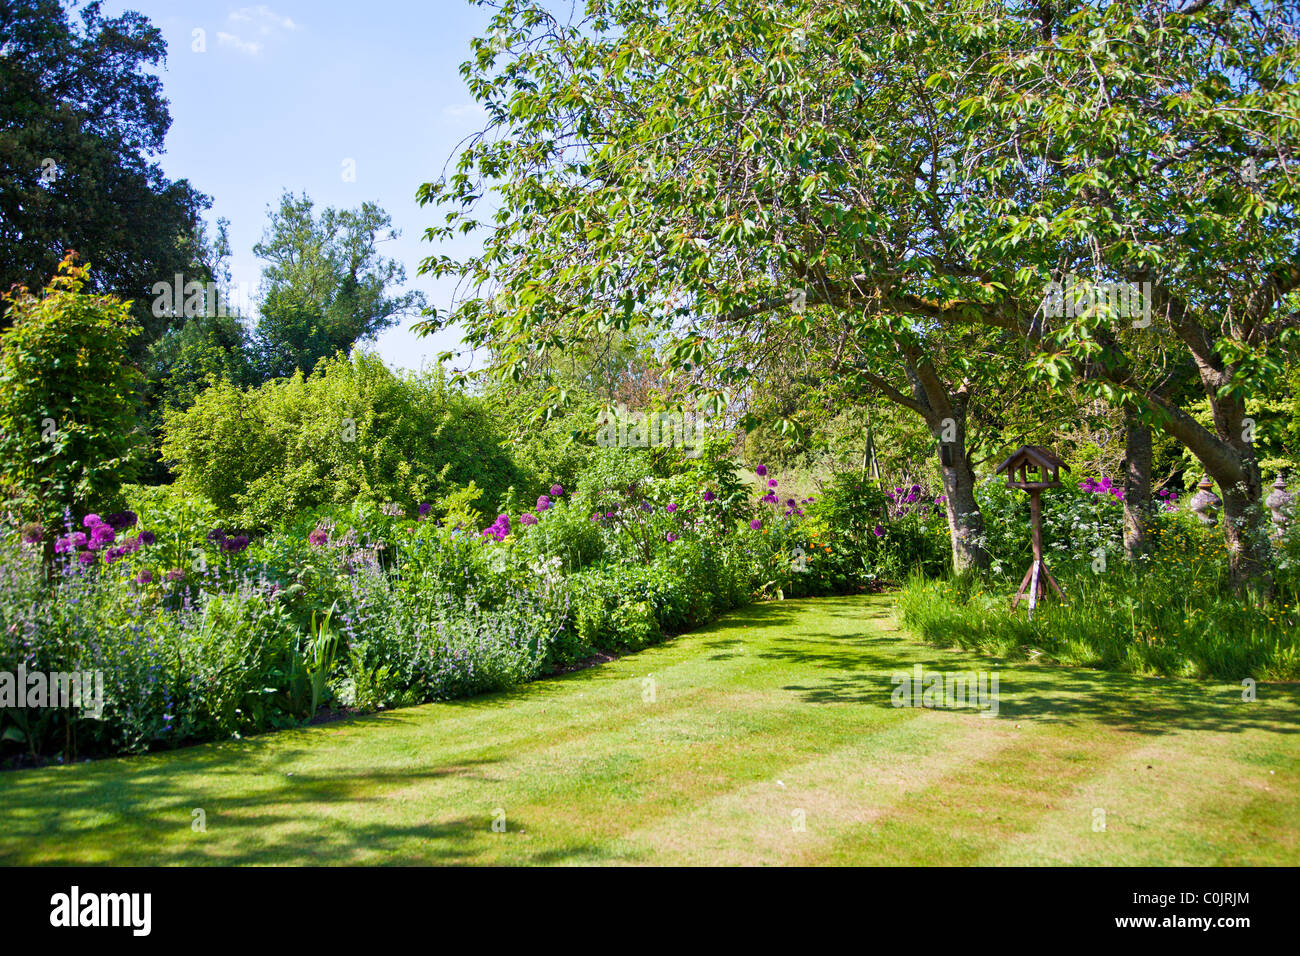 Flower borders or beds around a stripey lawn in an English country garden in summer with wooden bird table set under trees. Stock Photo